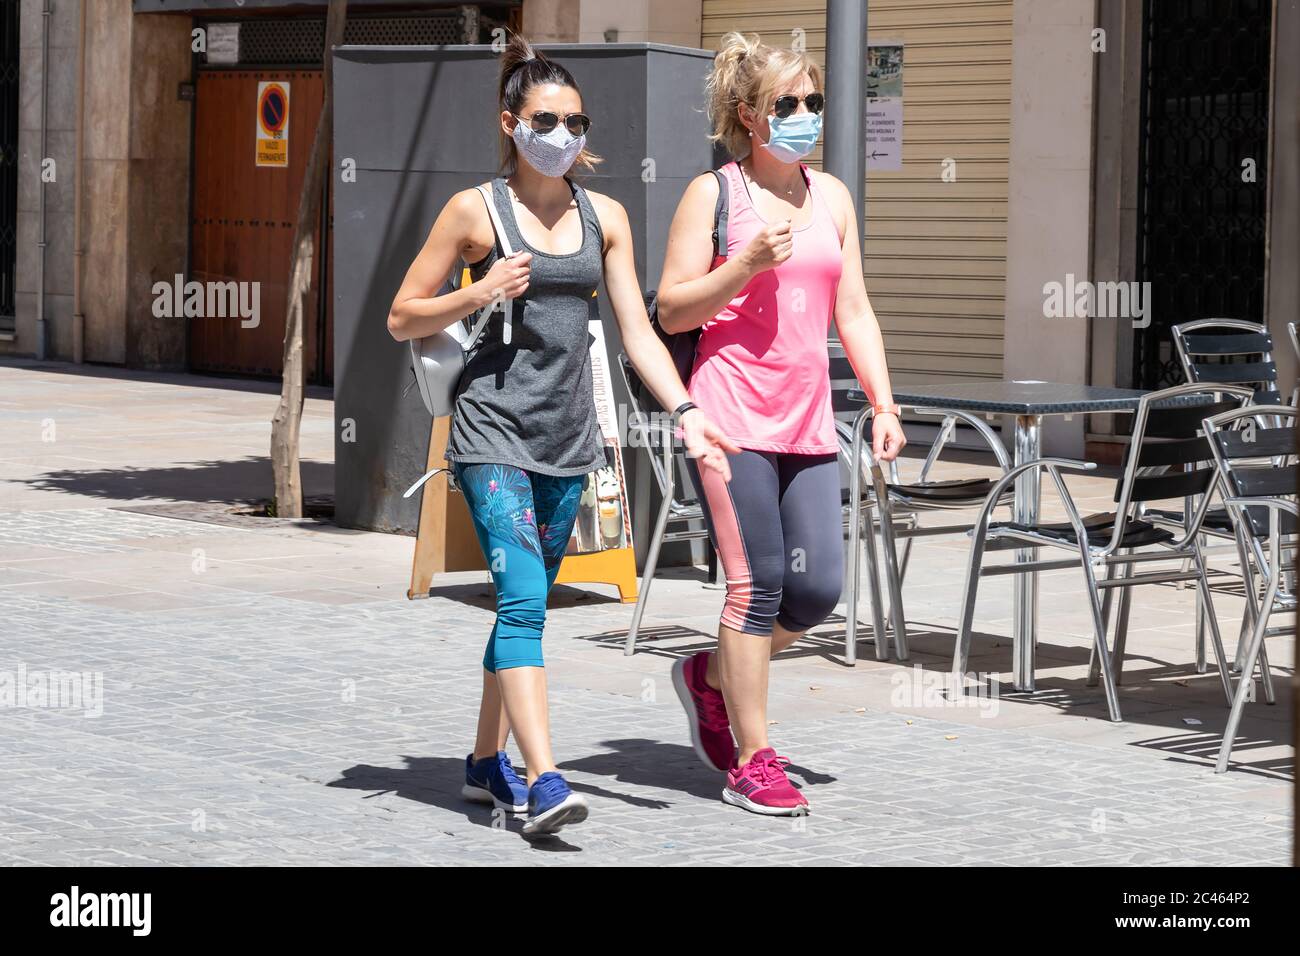 Ubeda, Jaen, Spain - June 19, 2020: Two women walking and wearing protective or medical face masks during the alarm state and quarantine in Spain. Stock Photo